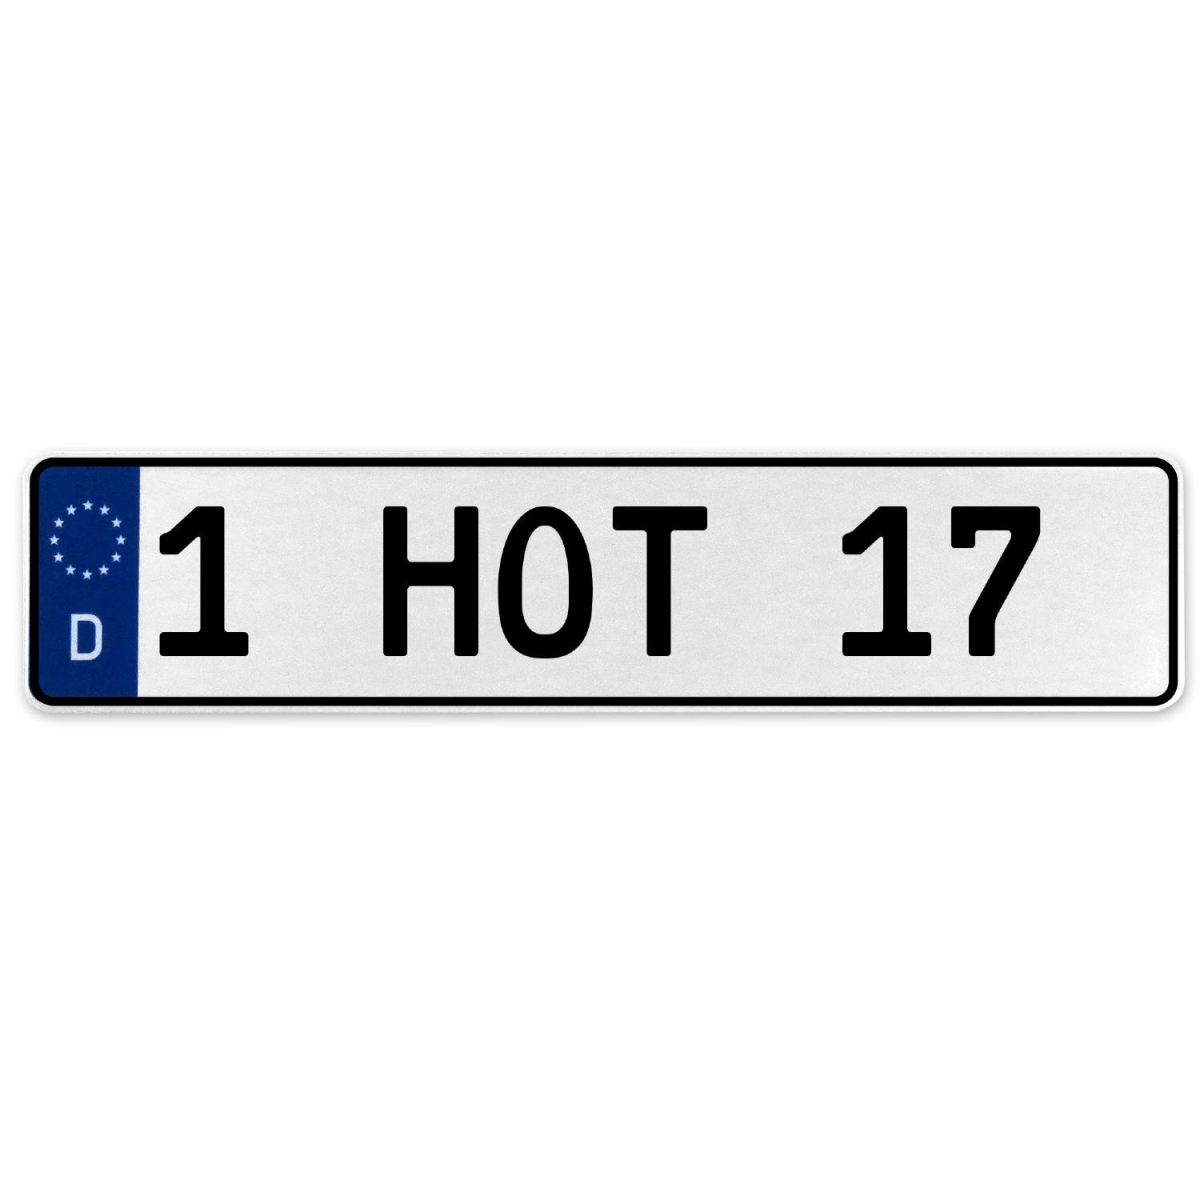 1 Hot 17 - White Aluminum Street Sign Mancave Euro Plate Name Door Sign Wall